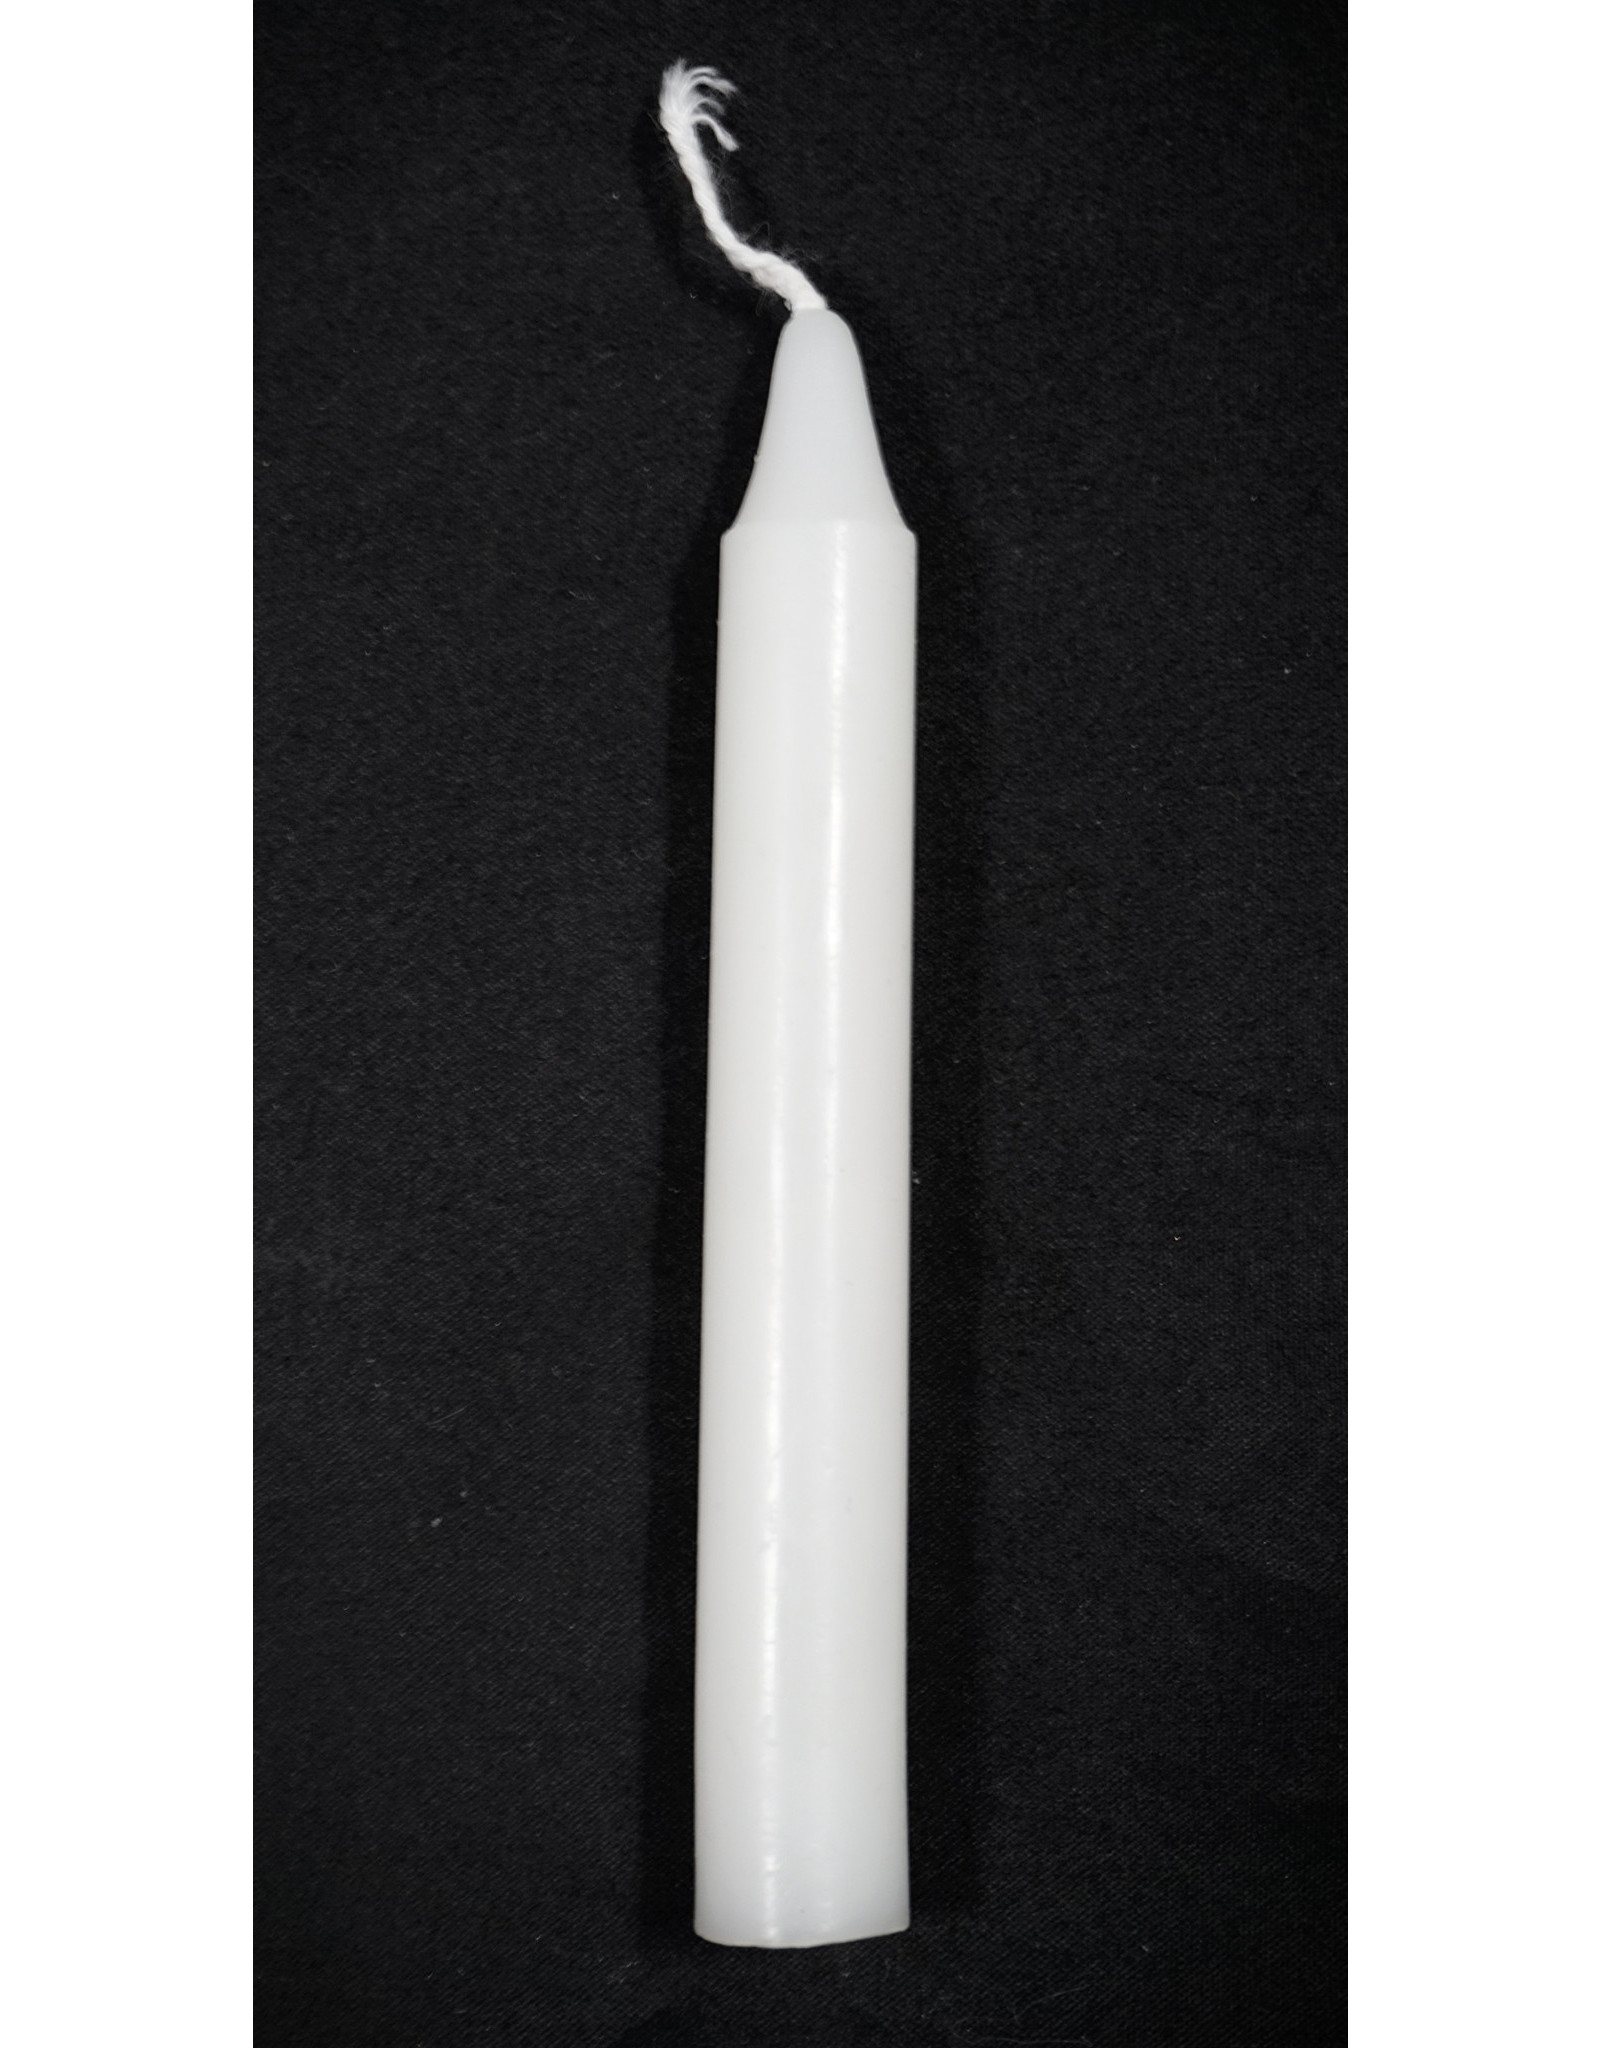 White Chime Candle - Purity